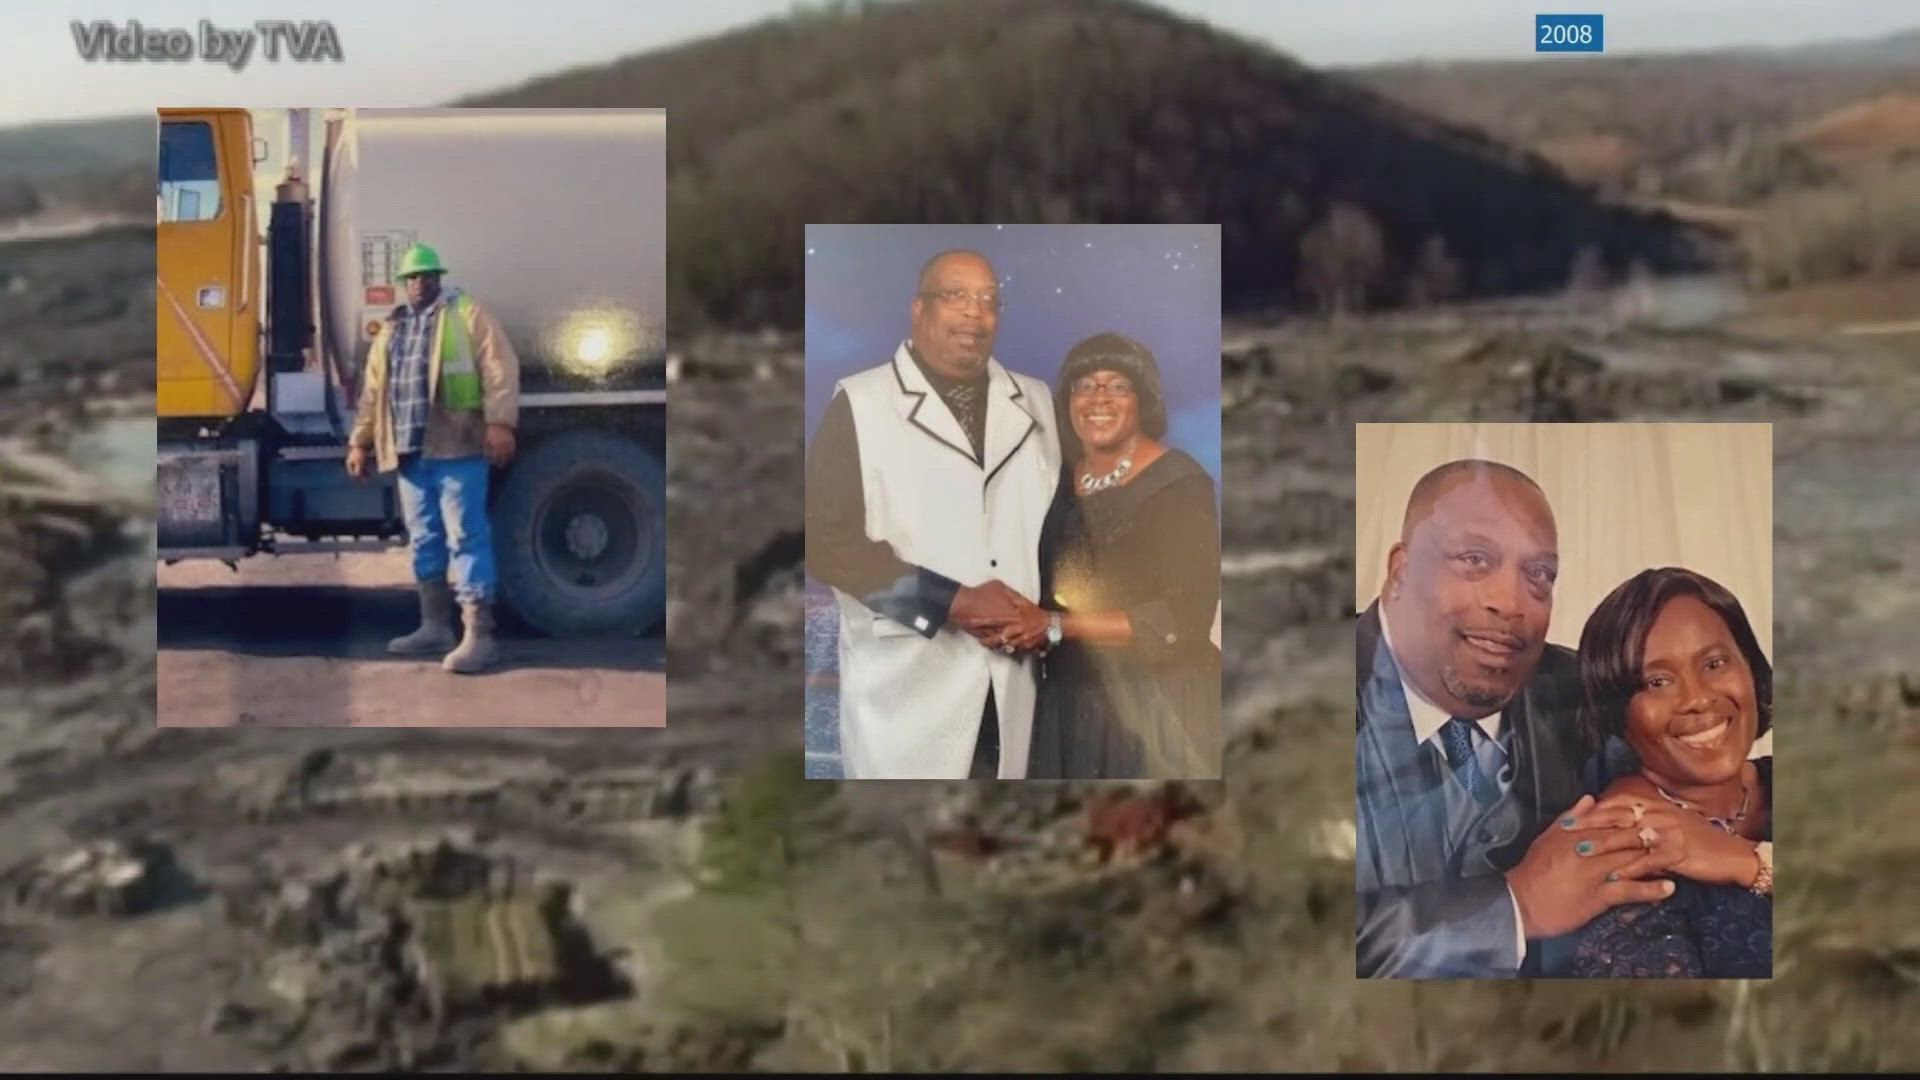 The 2008 Kingston Coal Ash Spill is one of the worst environmental disasters in U.S. history.